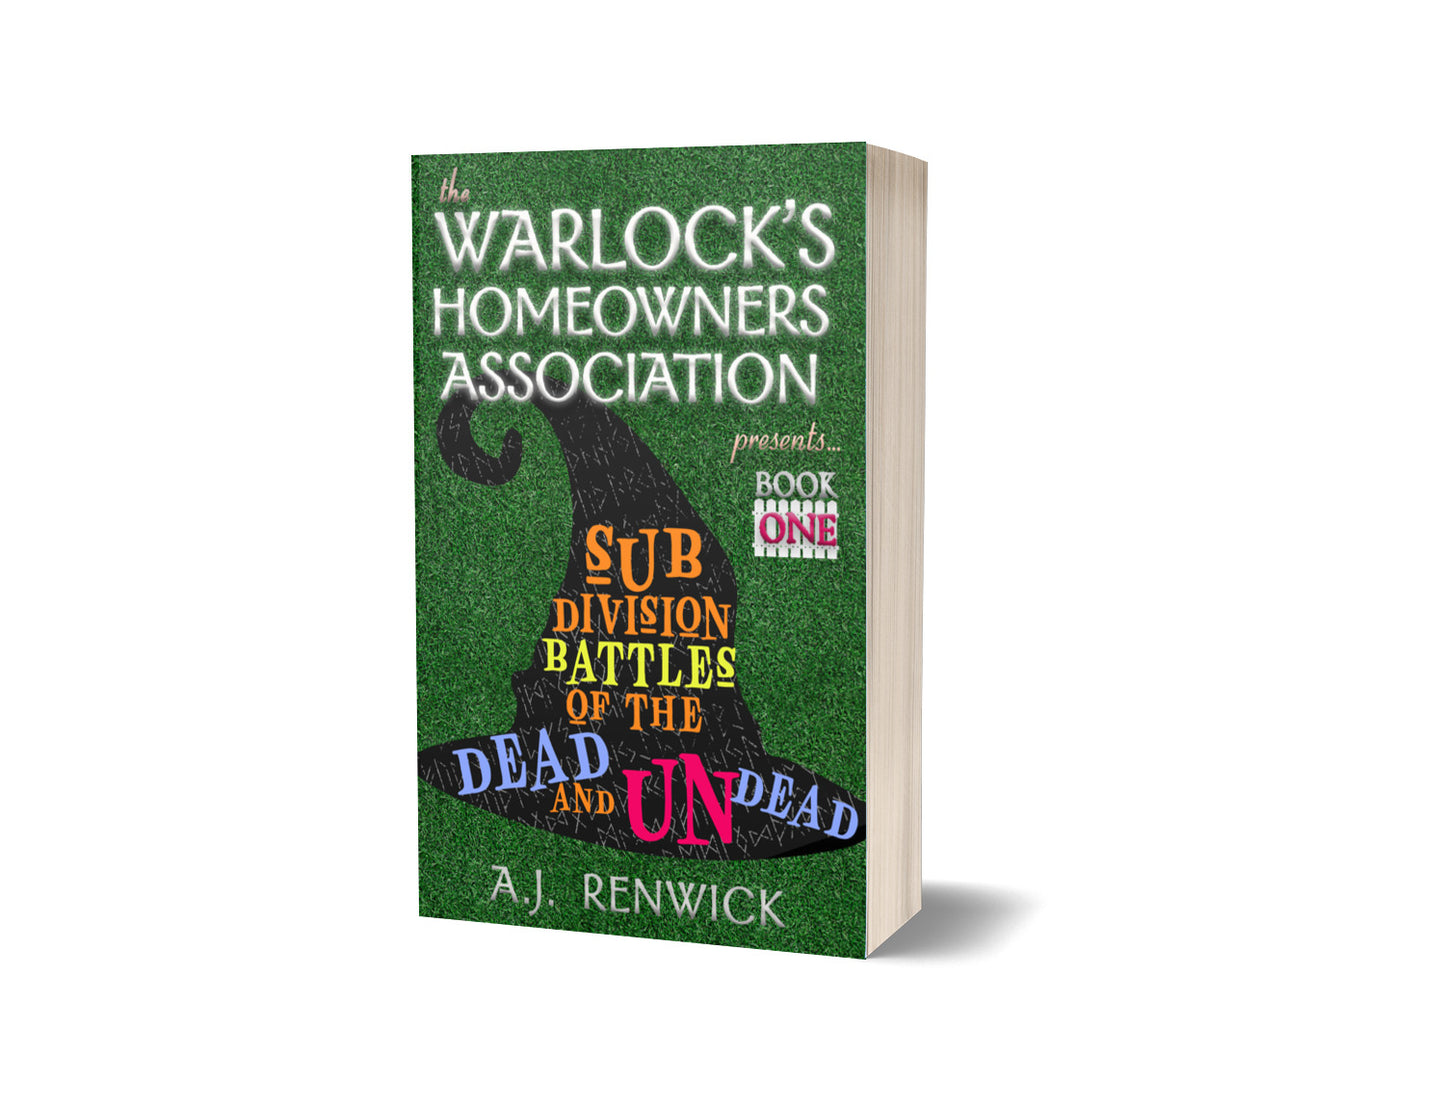 Subdivision Battles of the Dead and Undead (The Warlock's Homeowners Association Book 1)